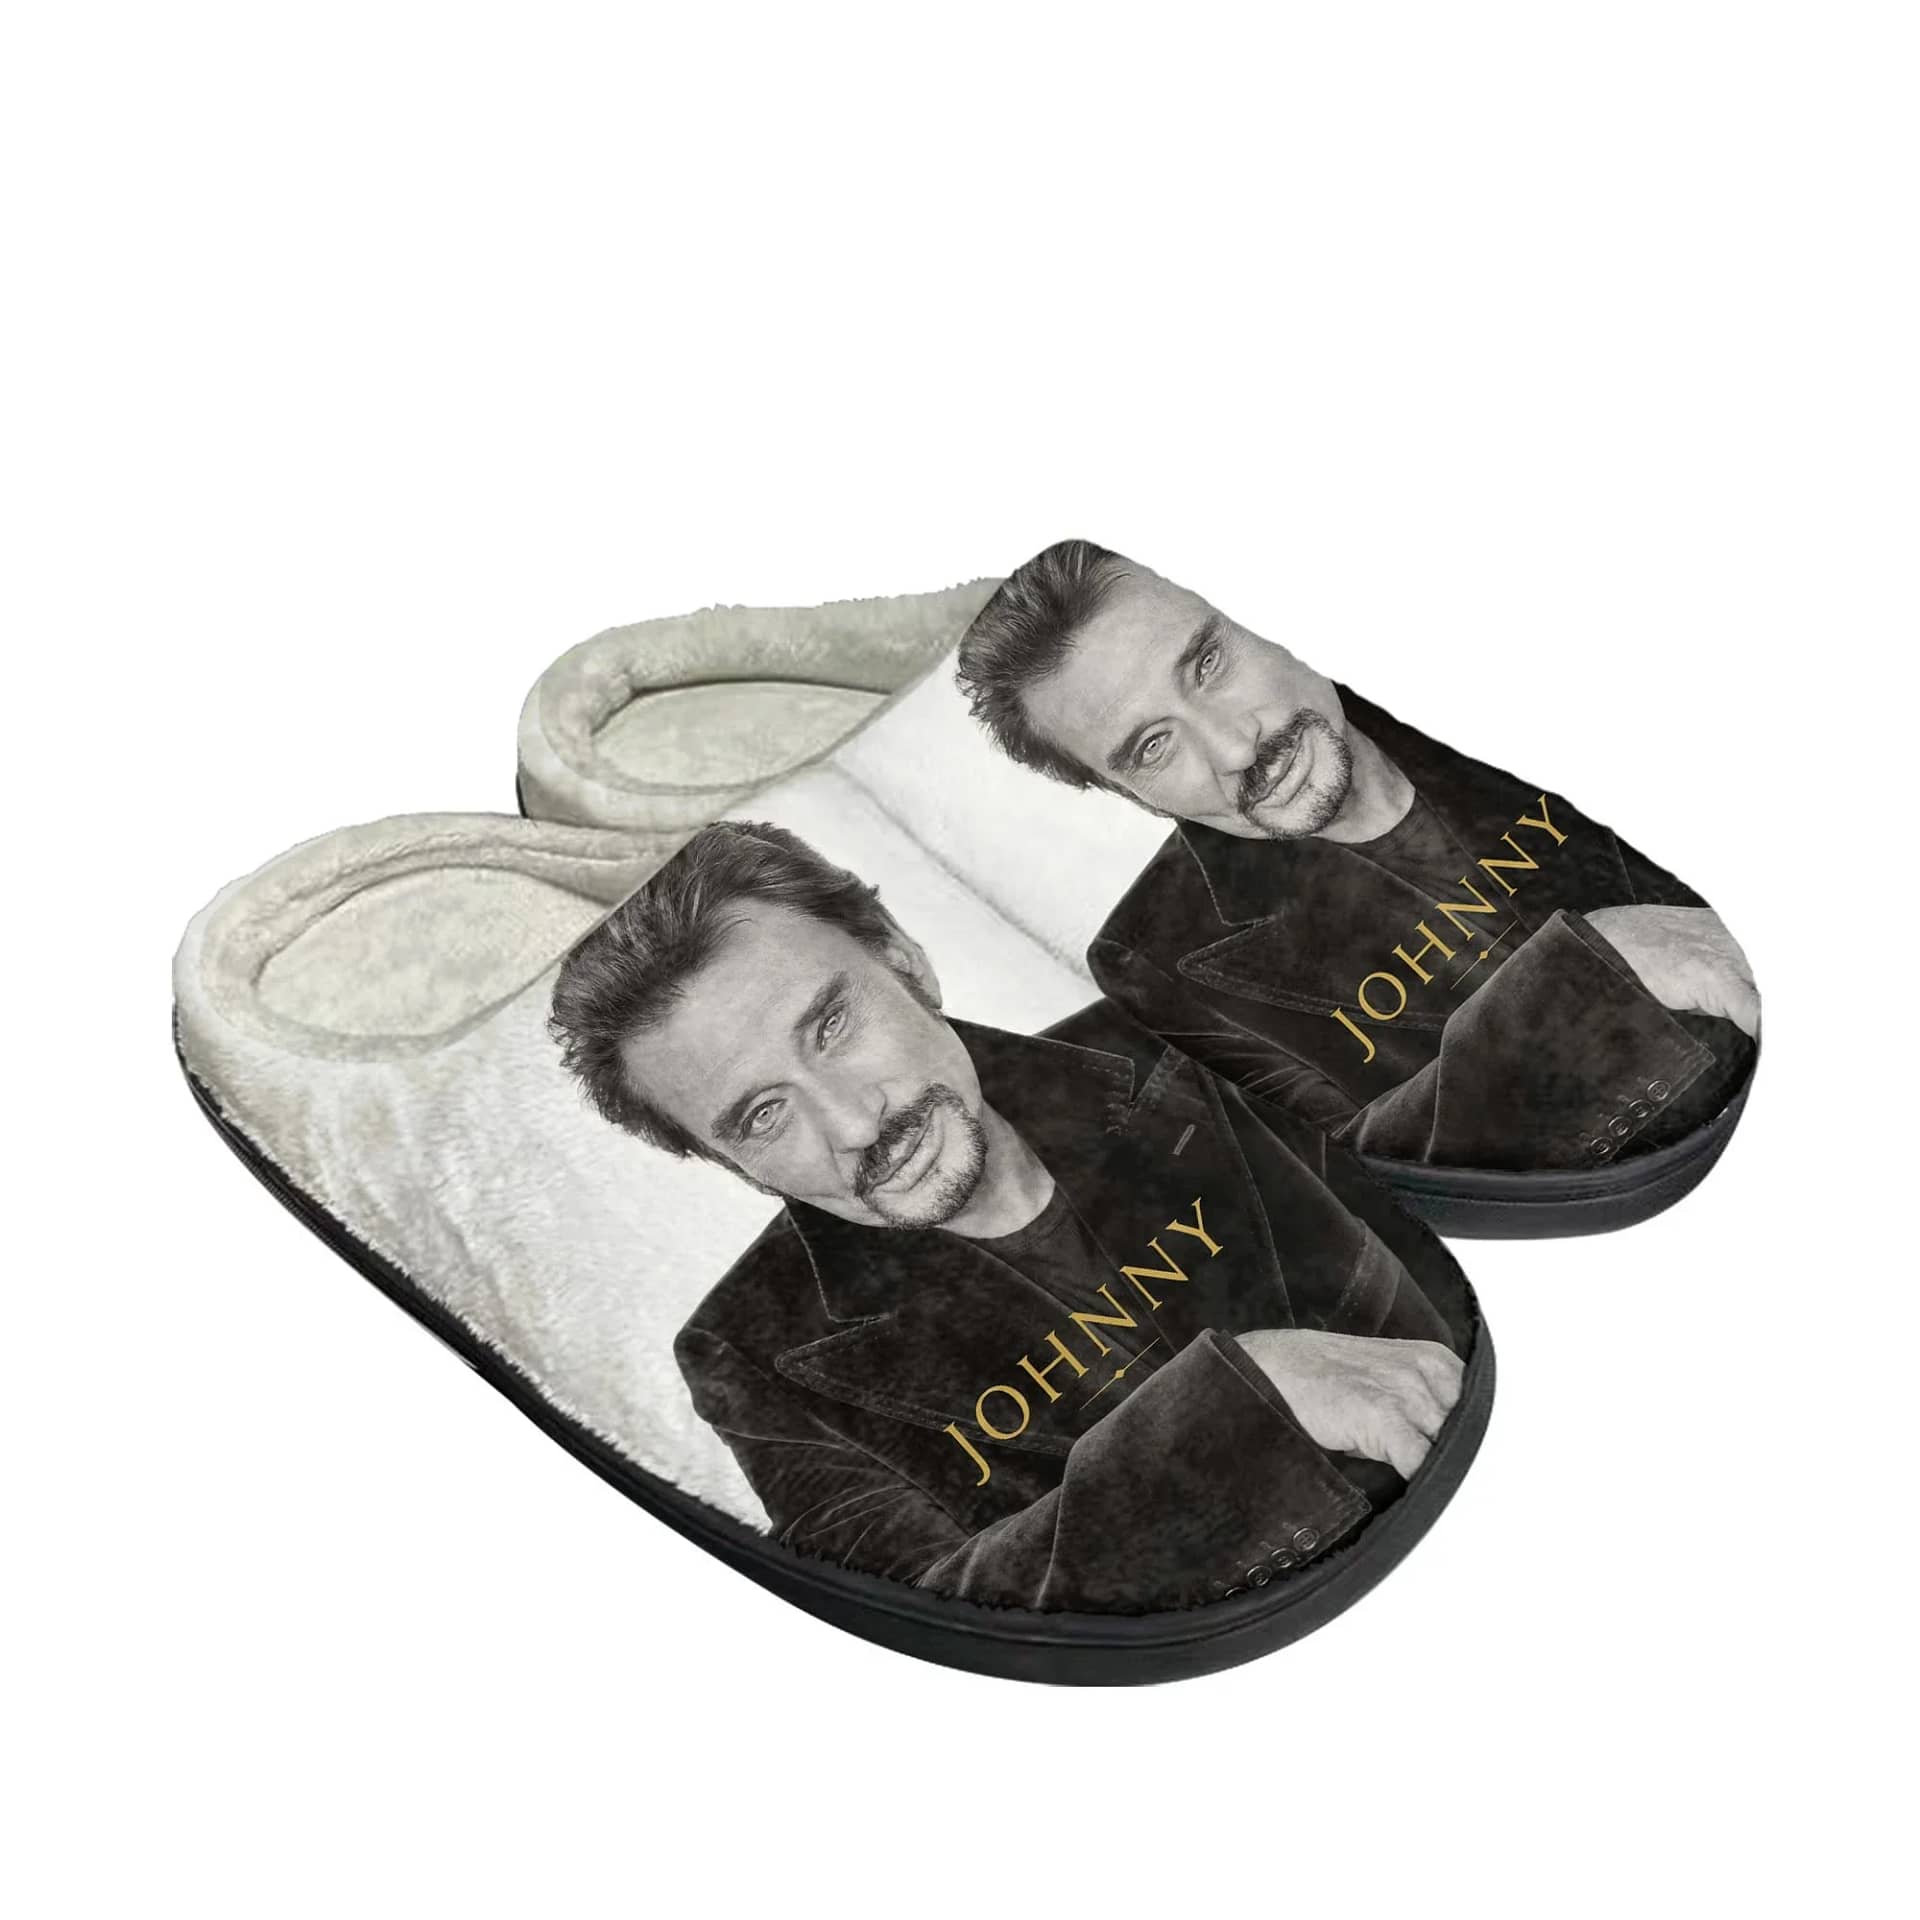 Johnny Hallyday Rock Singer Shoes Slippers